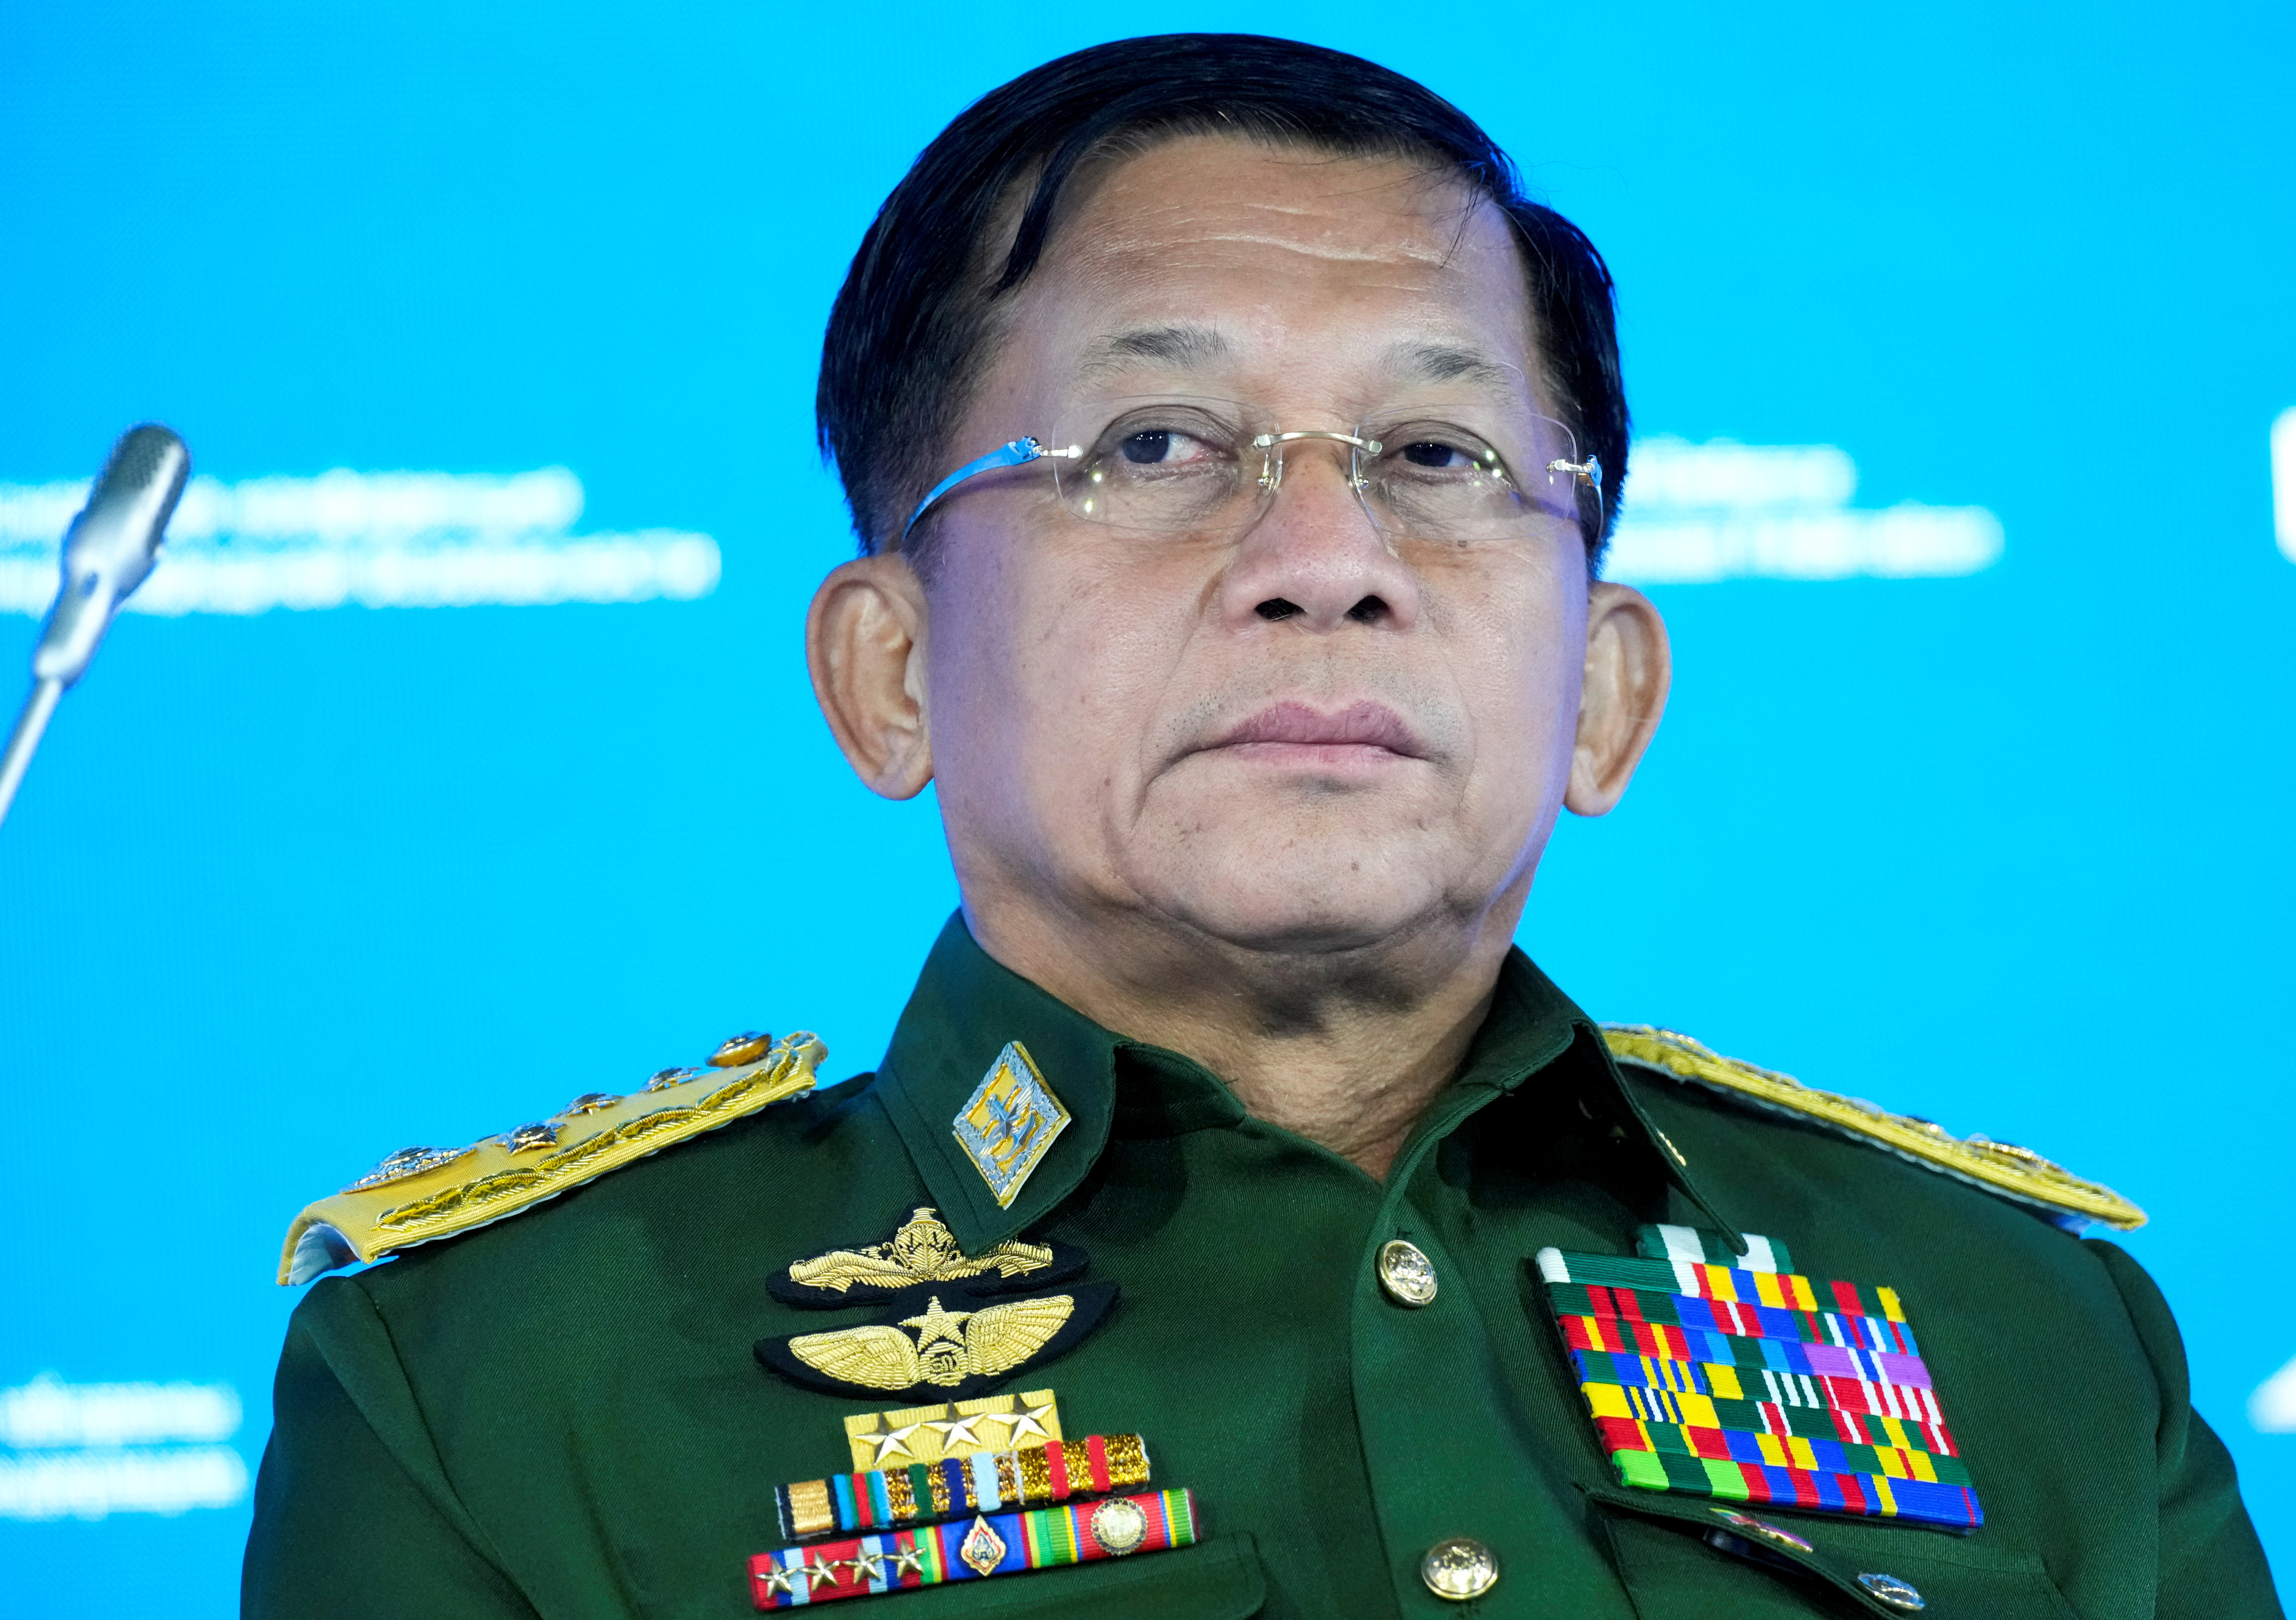 Commander-in-Chief of Myanmar's armed forces, Senior General Min Aung Hlaing attends the IX Moscow conference on international security in Moscow